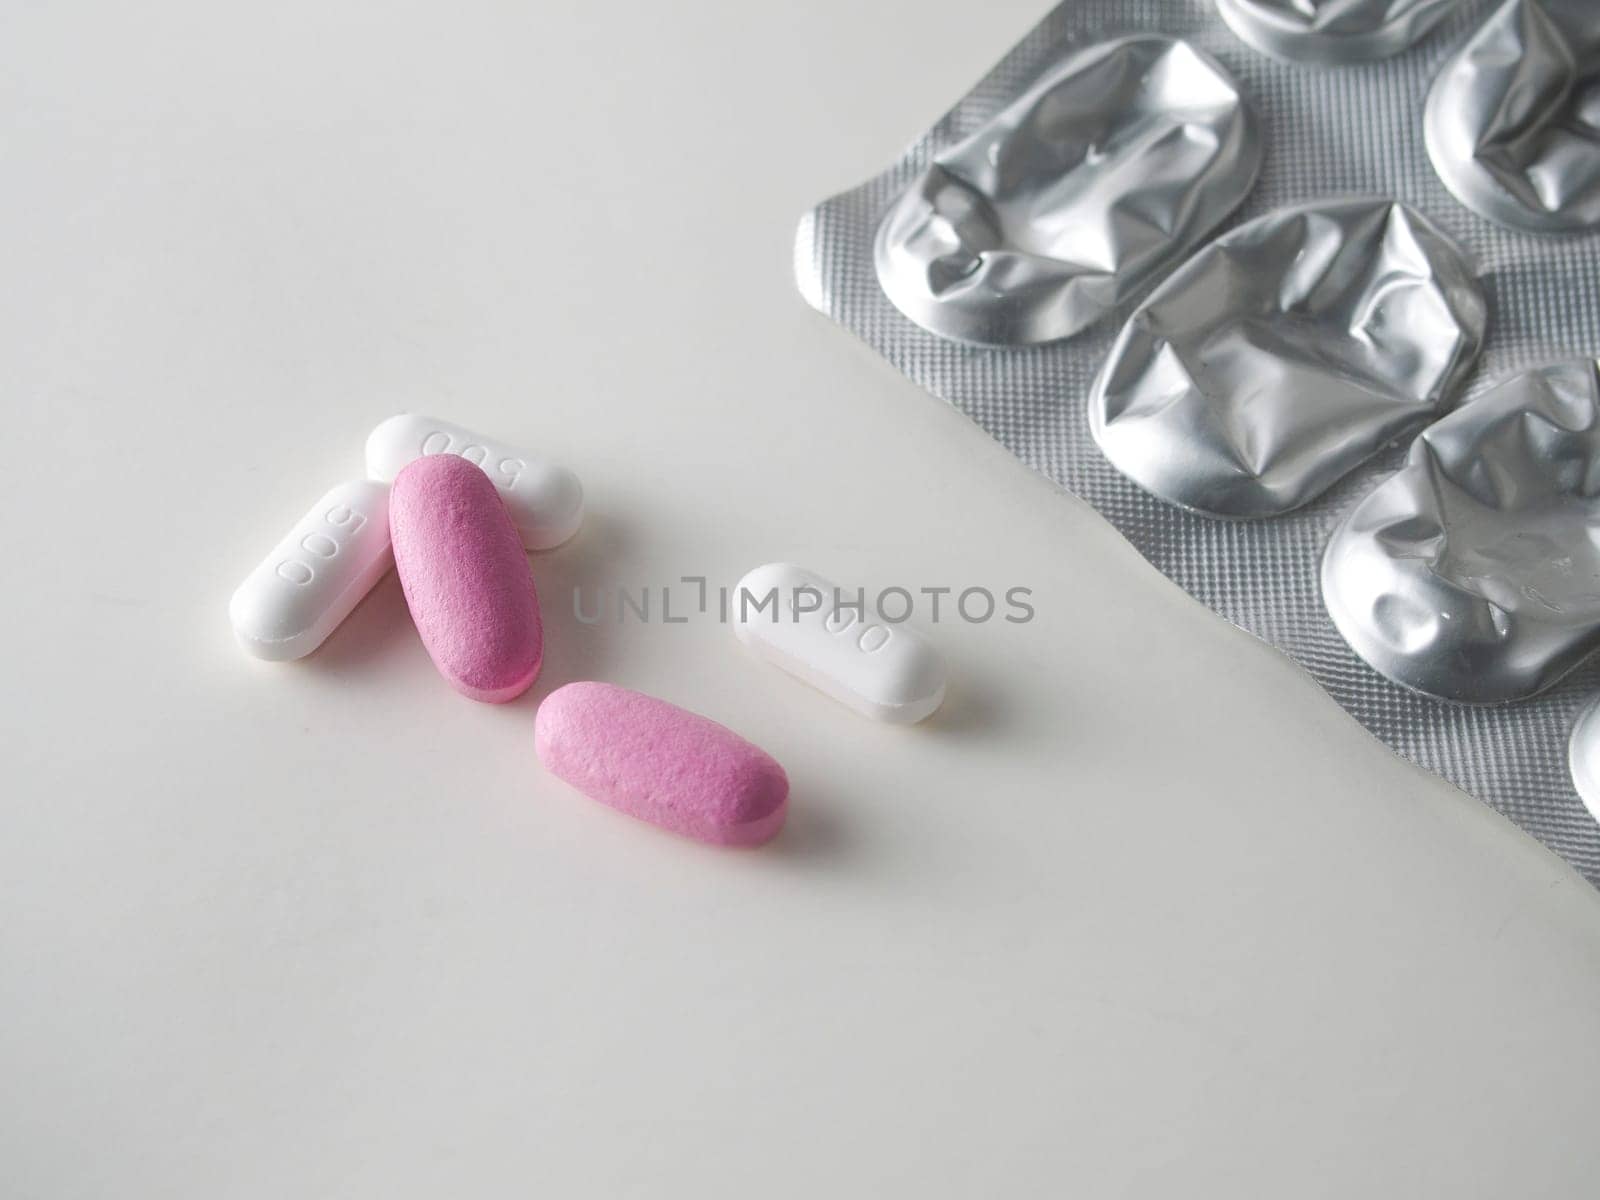 multicolored medical pills and packs of pills on a white table.